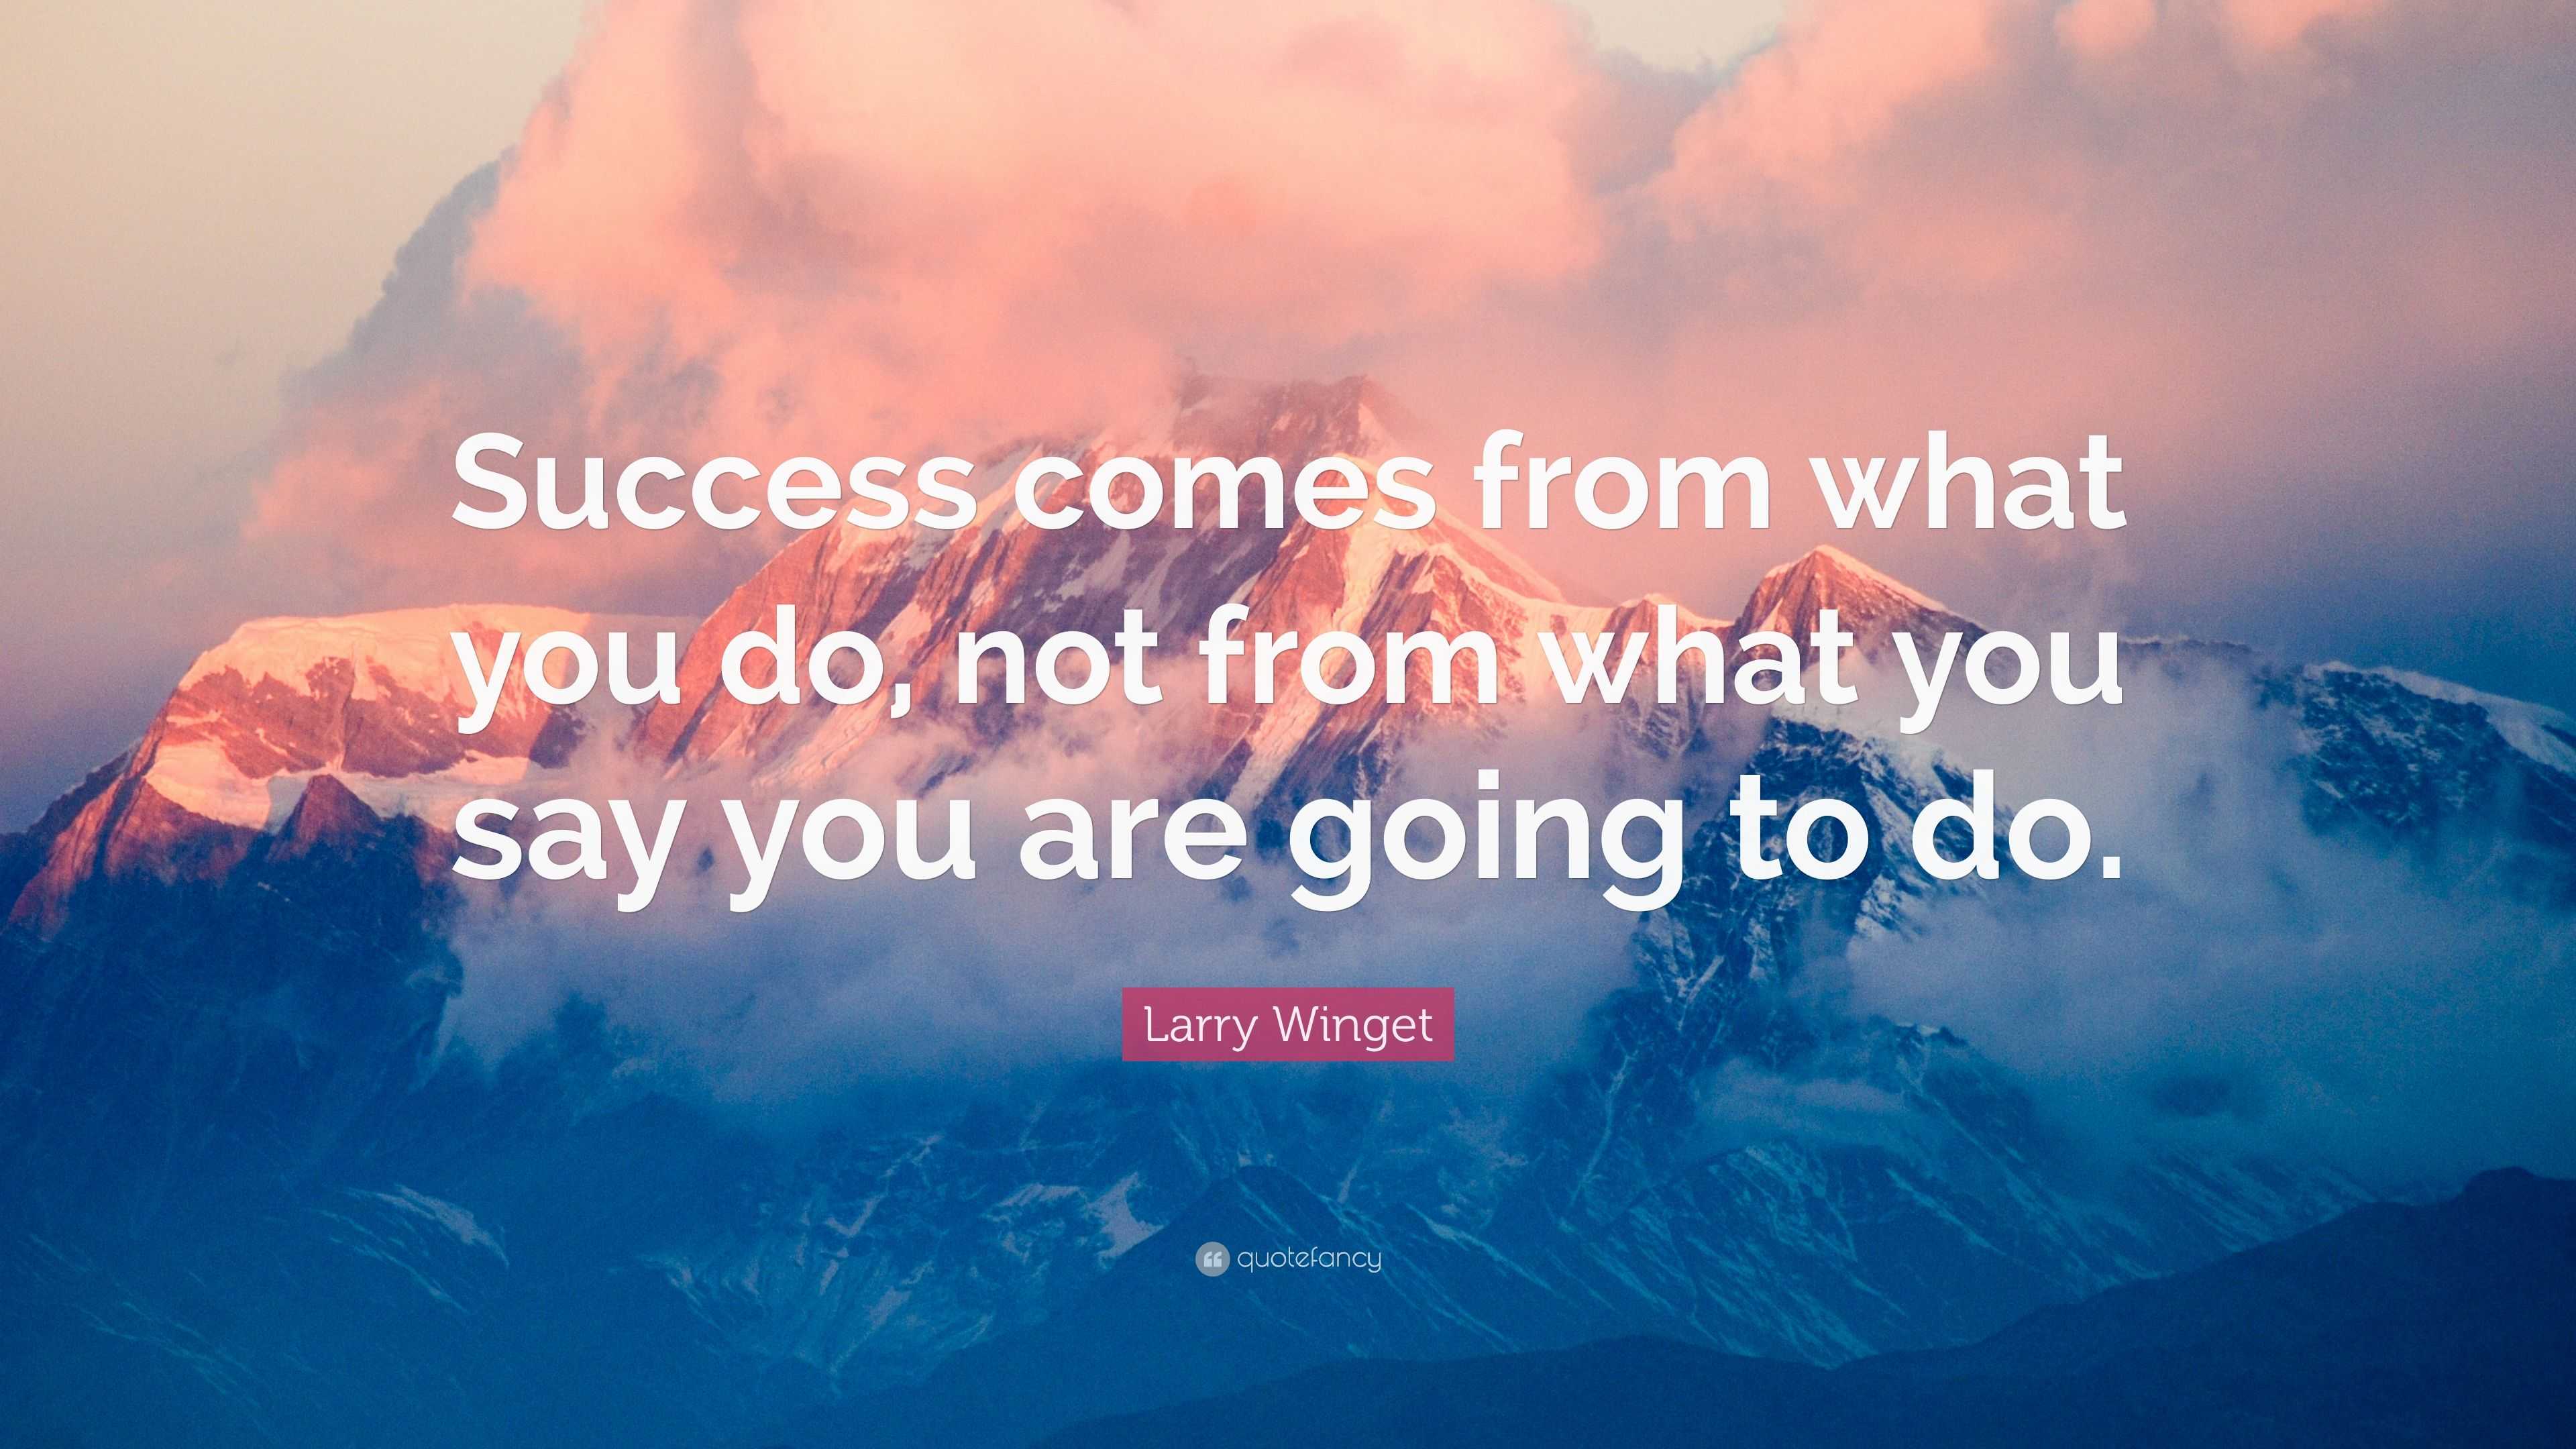 Larry Winget Quote: “Success comes from what you do, not from what you ...